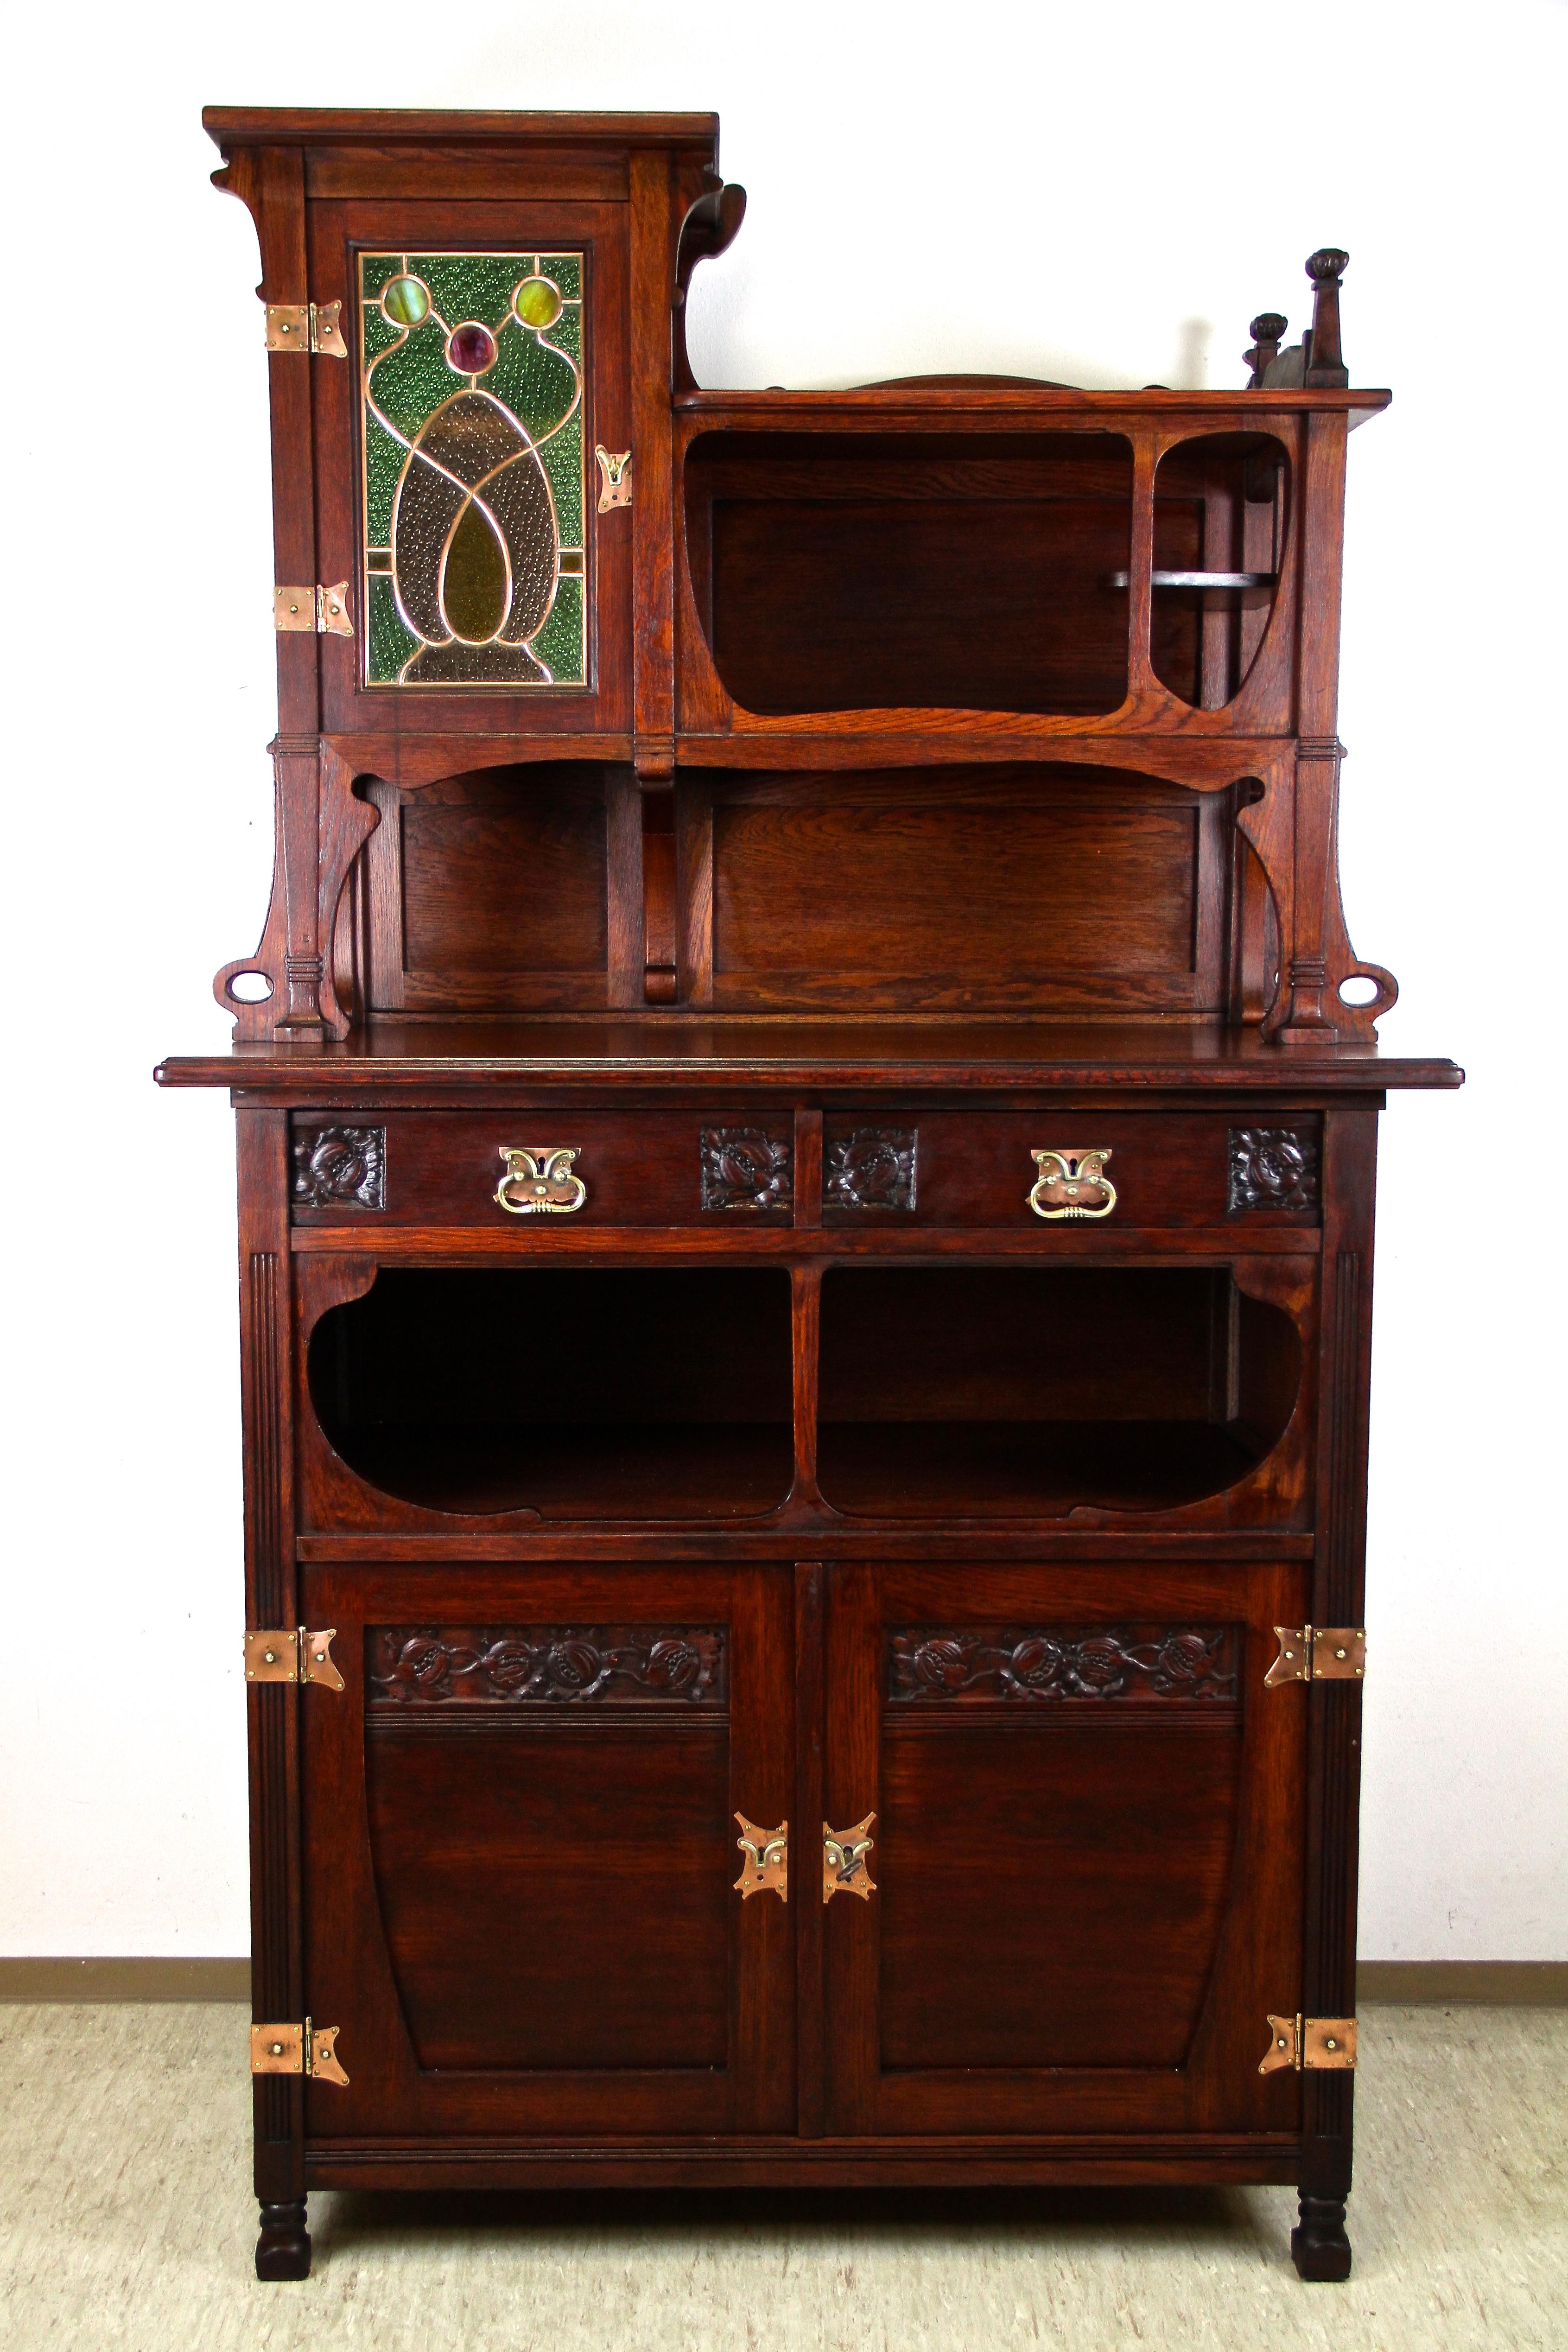 Marvelous Art Nouveau oakwood cabinet/ Buffet originated from the period in Austria around 1900. An exceptional designed buffet made of solid oakwood, reflecting the renown organic design language of the Art Nouveau period at its best. Consisting of